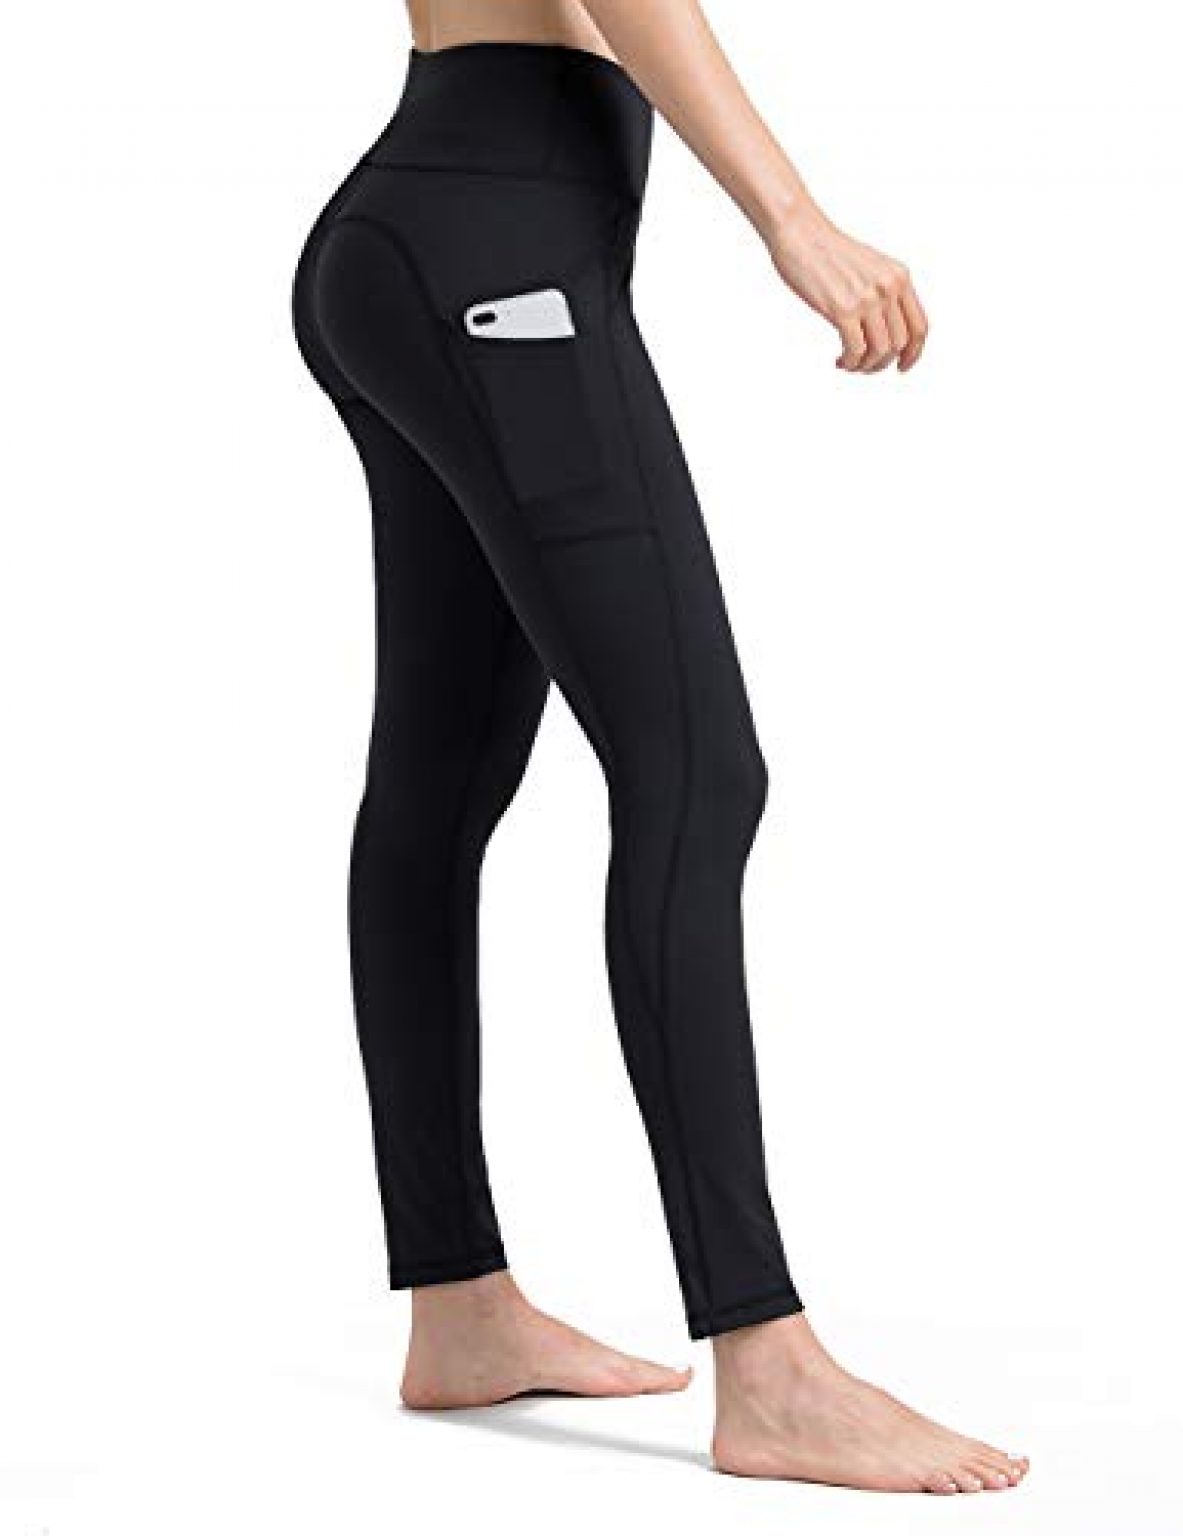 ALONG FIT Yoga Pants with Side Pockets — Deals from SaveaLoonie!